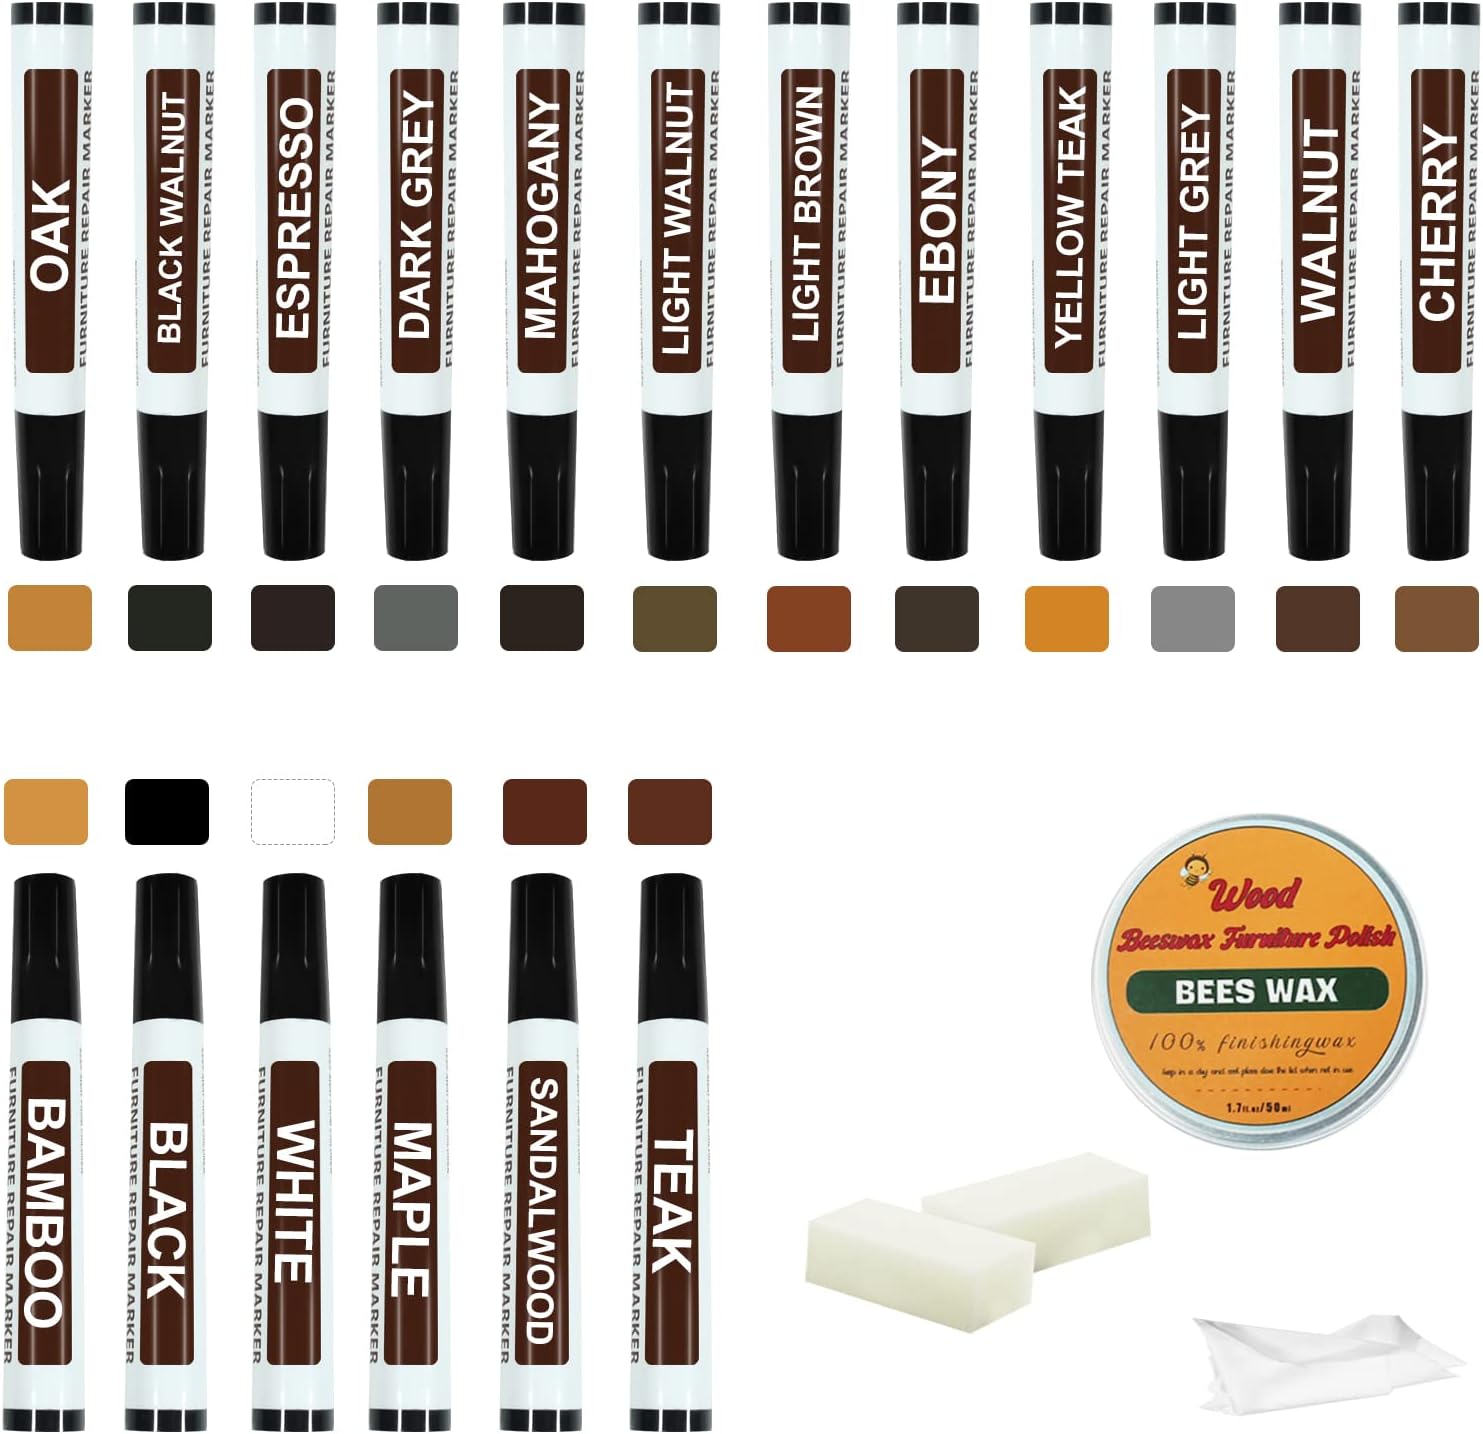 Furniture Markers Touch Up Kit - New Upgrade 18 Colors Wood Scratch Repair Kit with Beeswax Furniture Polish, Wood Markers Pens for Scratches, Stains - Restore Wooden Floor, Table, Cabinet, Bedpost